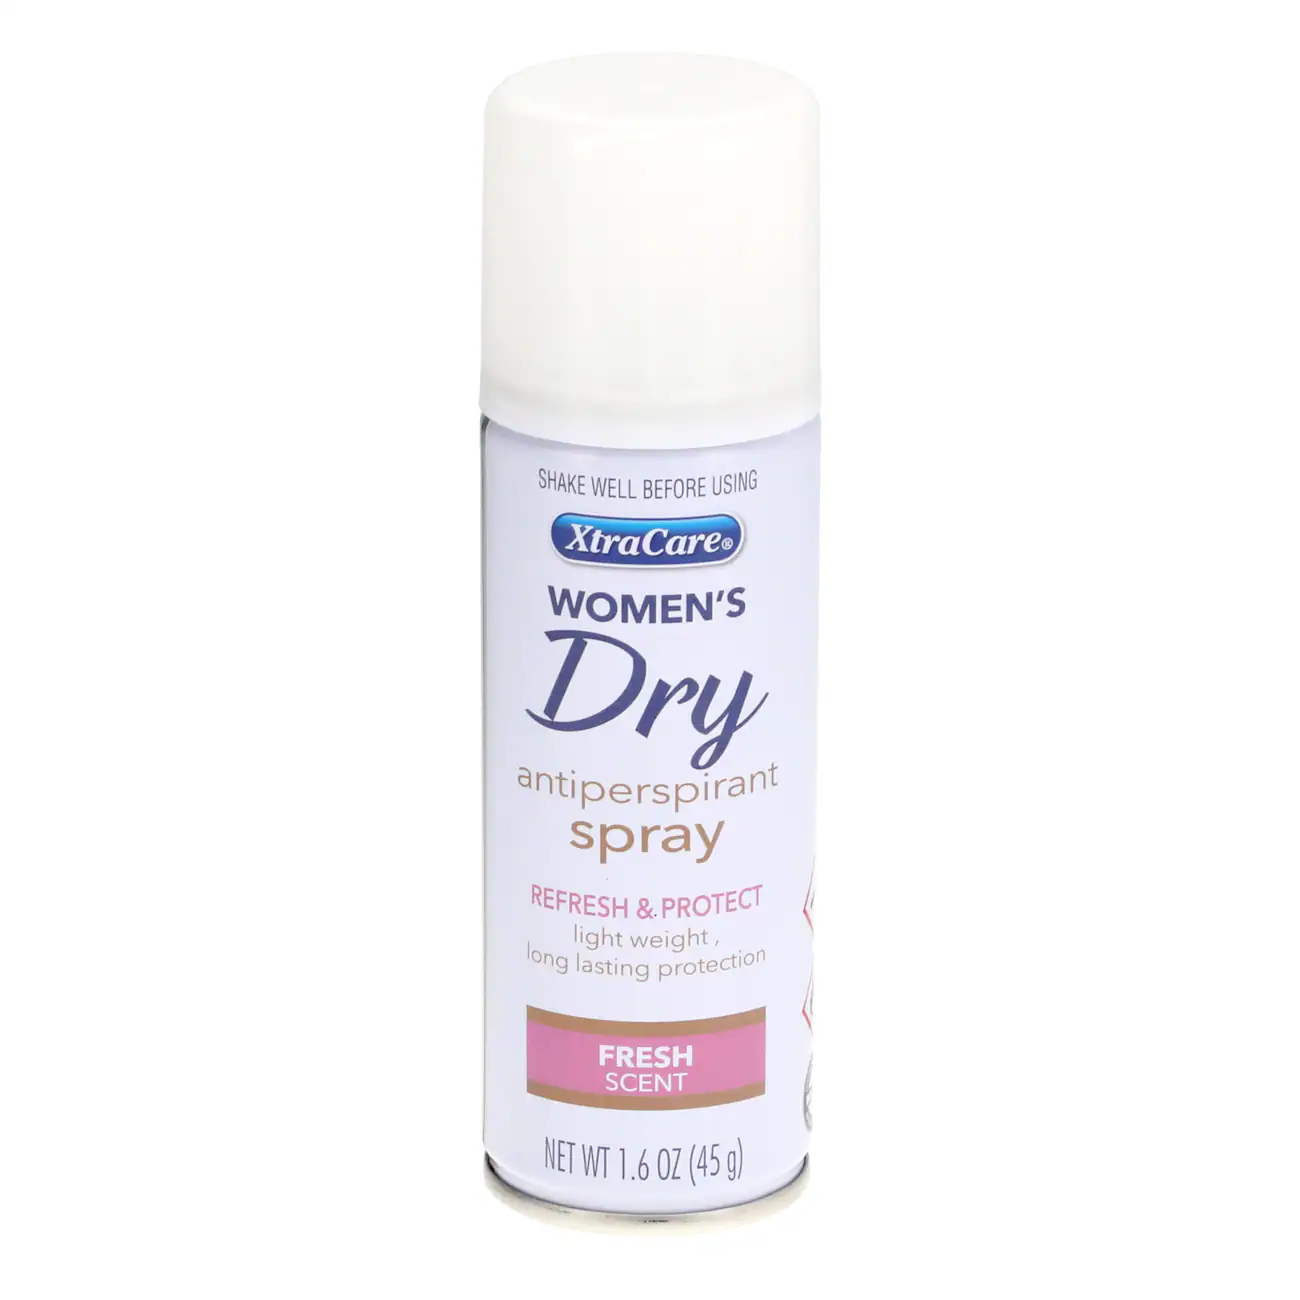 Xtra Care Lady's Shower Fresh Scented Dry Spray, 1.6 oz. Canisters